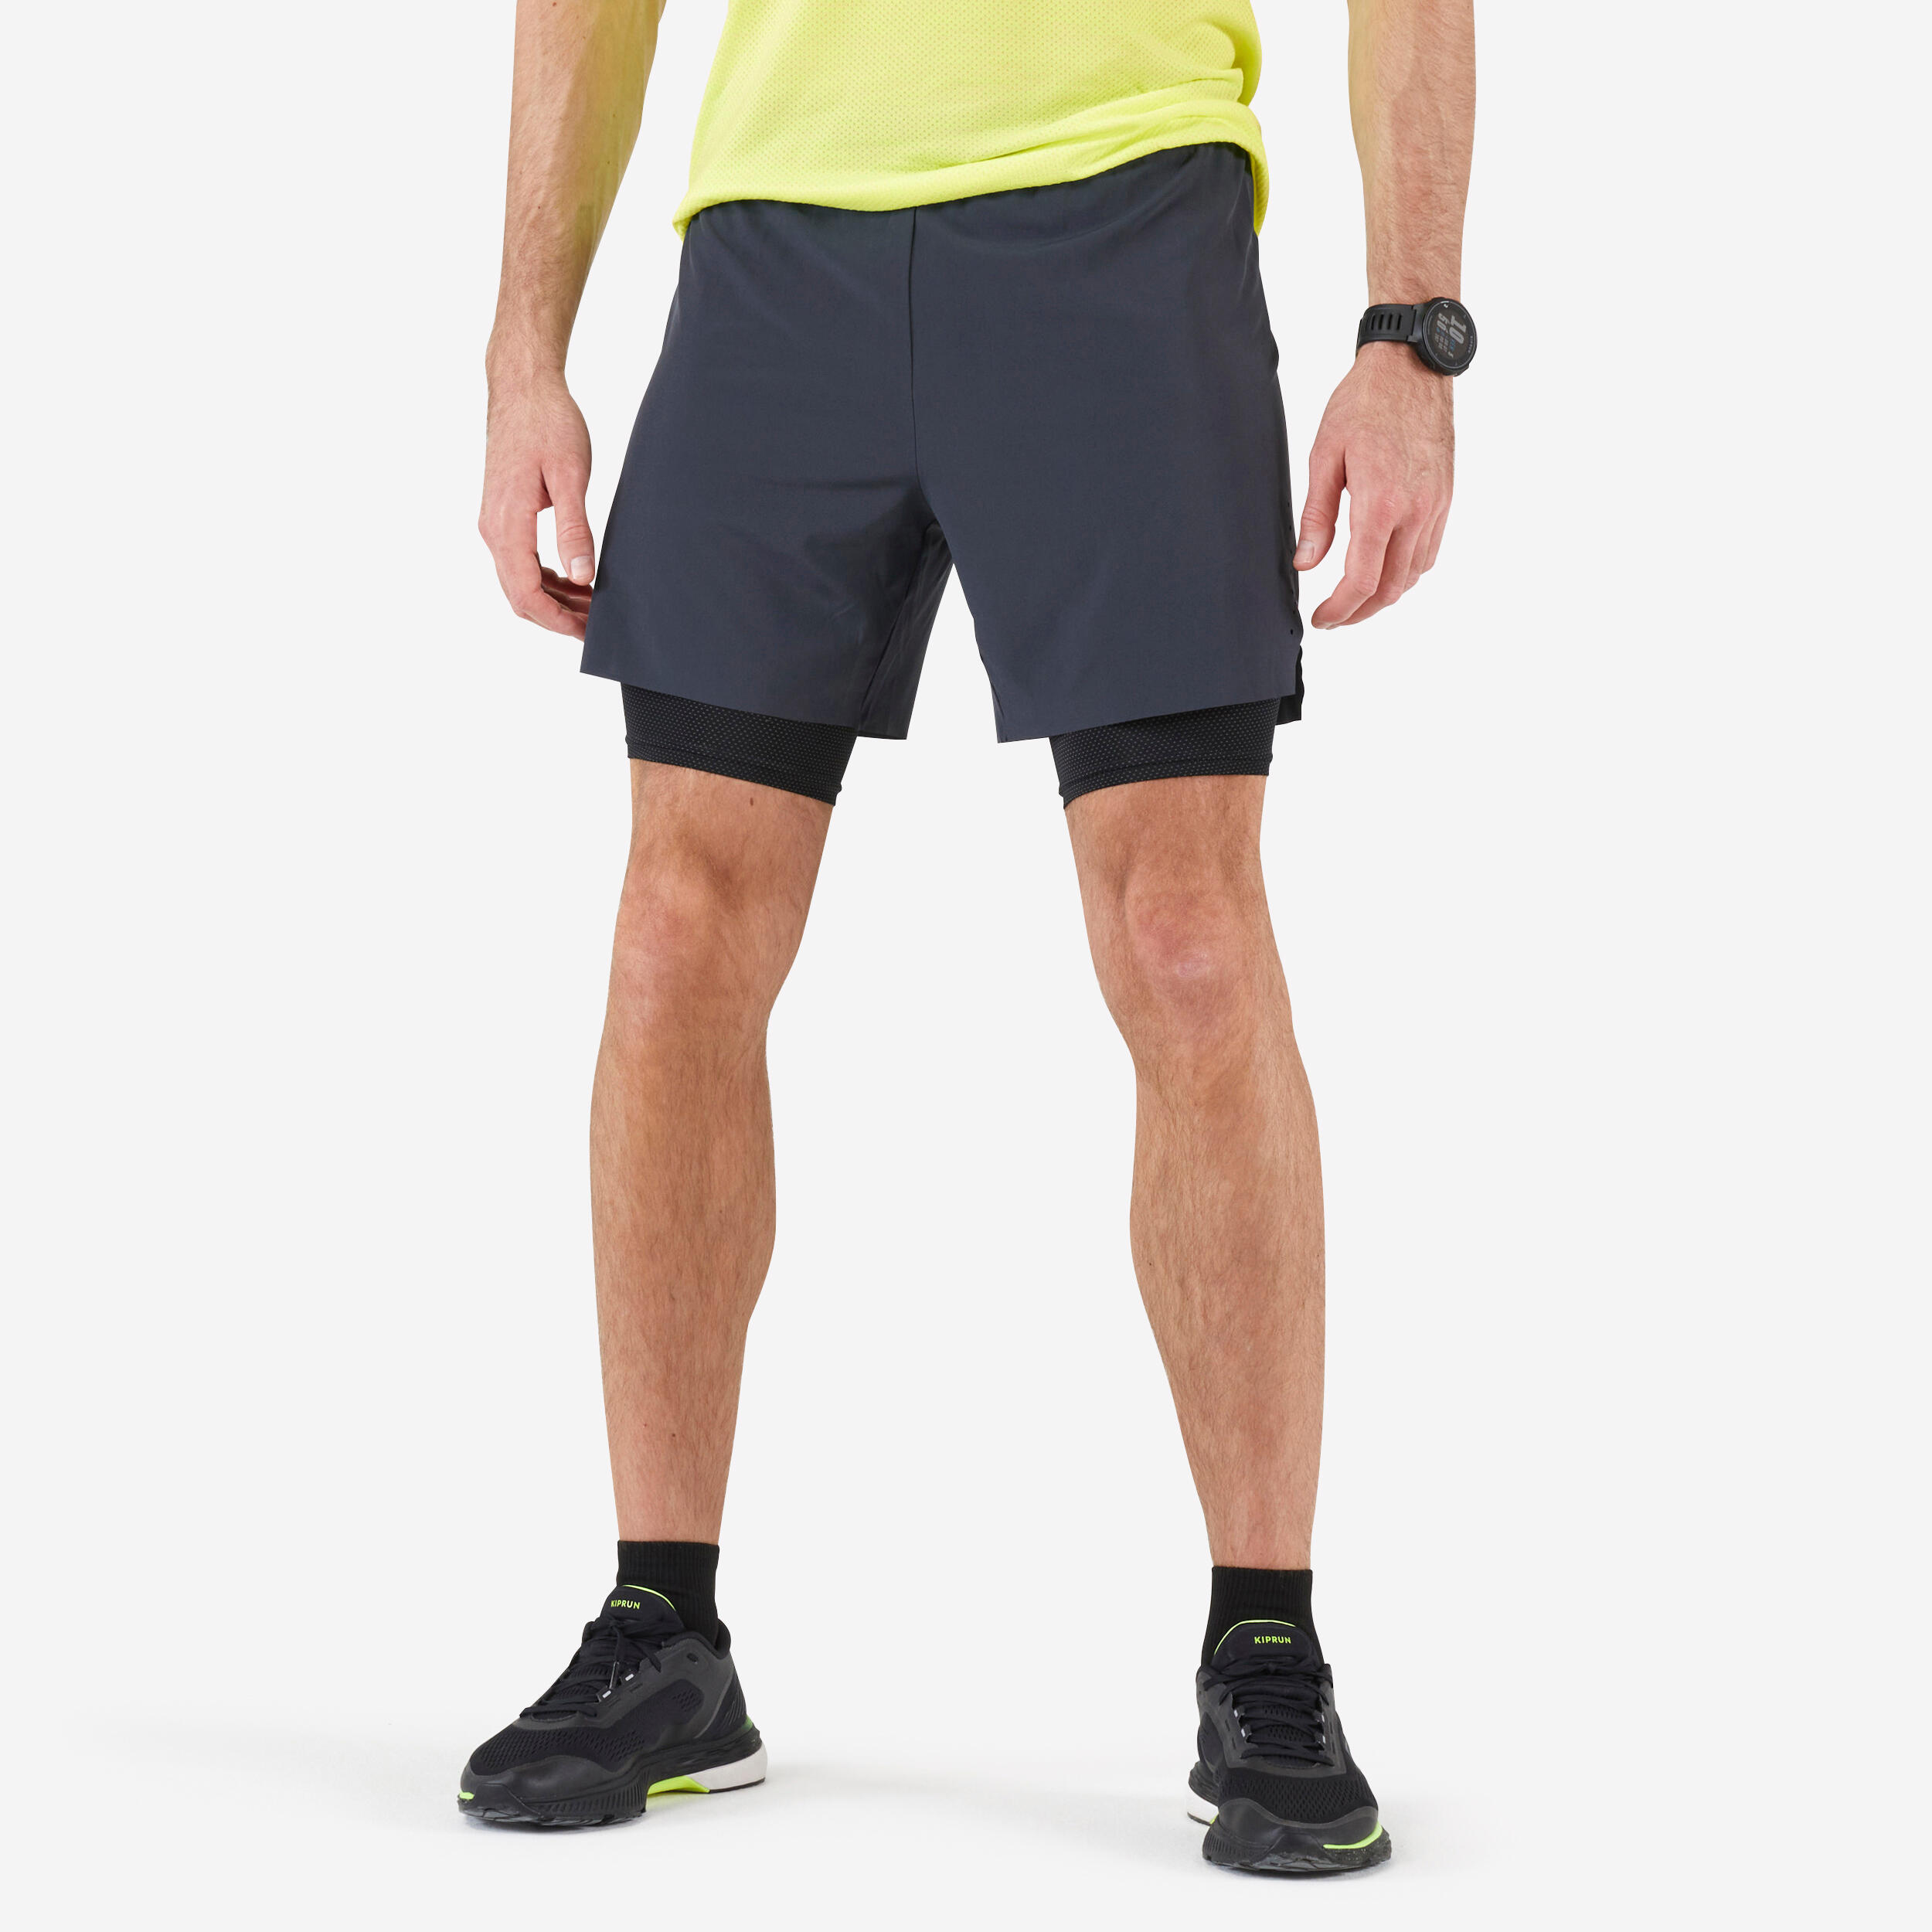 Men's 2-in-1 Running Shorts with Tights